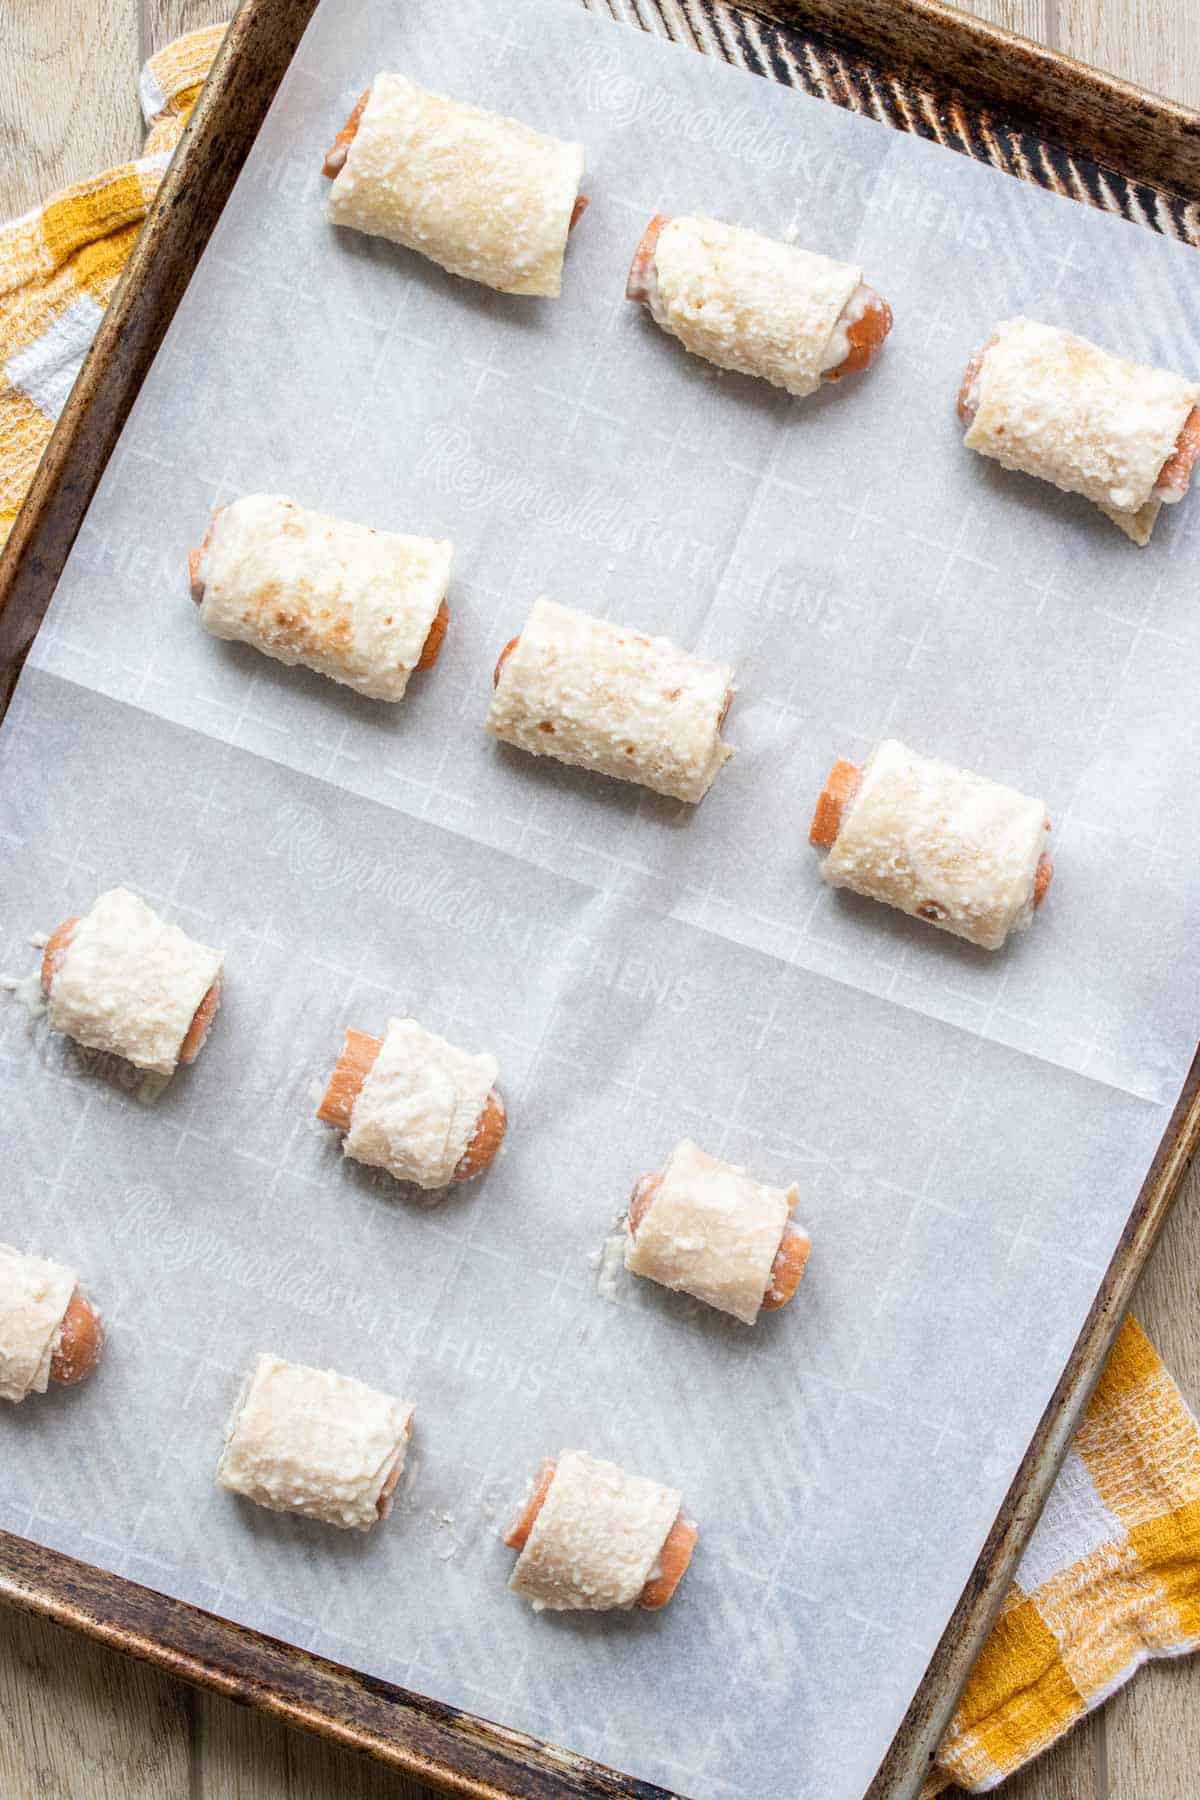 A baking sheet with parchment and hot dog pieces rolled with batter coated tortilla strips on it.